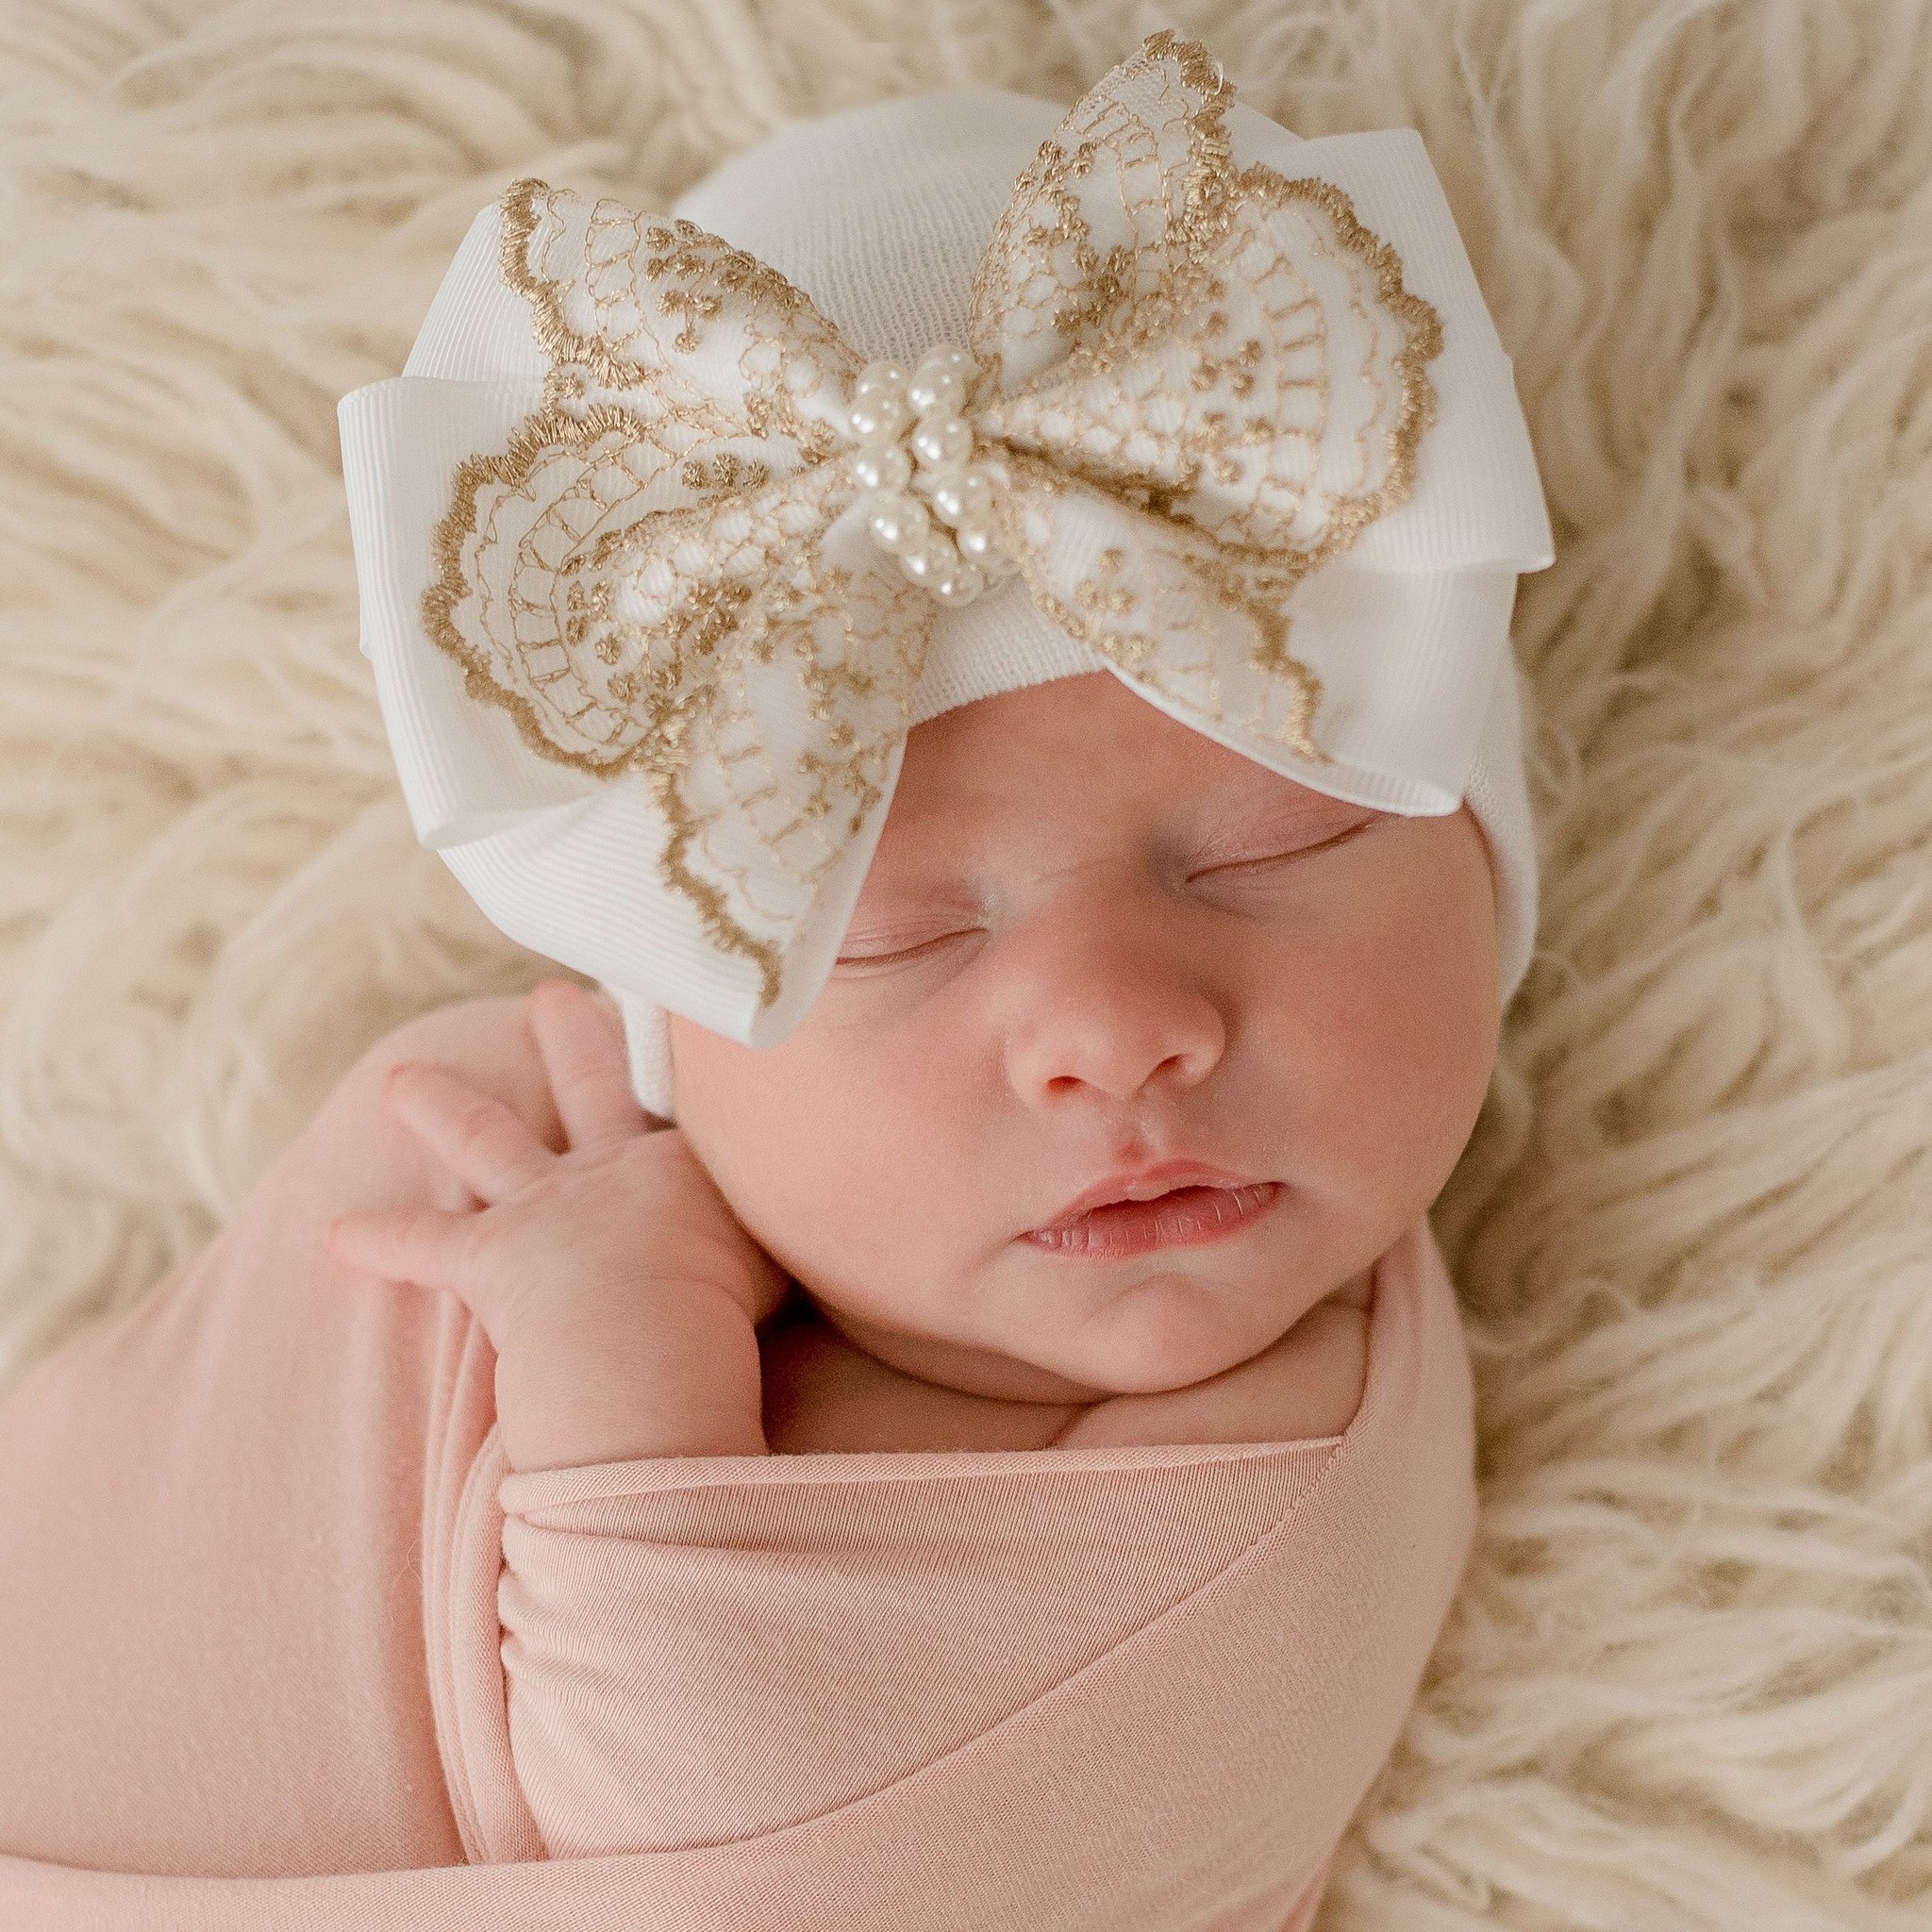 Elegant Gold Lace with Pearl Strand Newborn Girl Hospital Hat - PINK or White Baby Girl Hat - Newborn Hospital Hat for Girls - Gold Lace